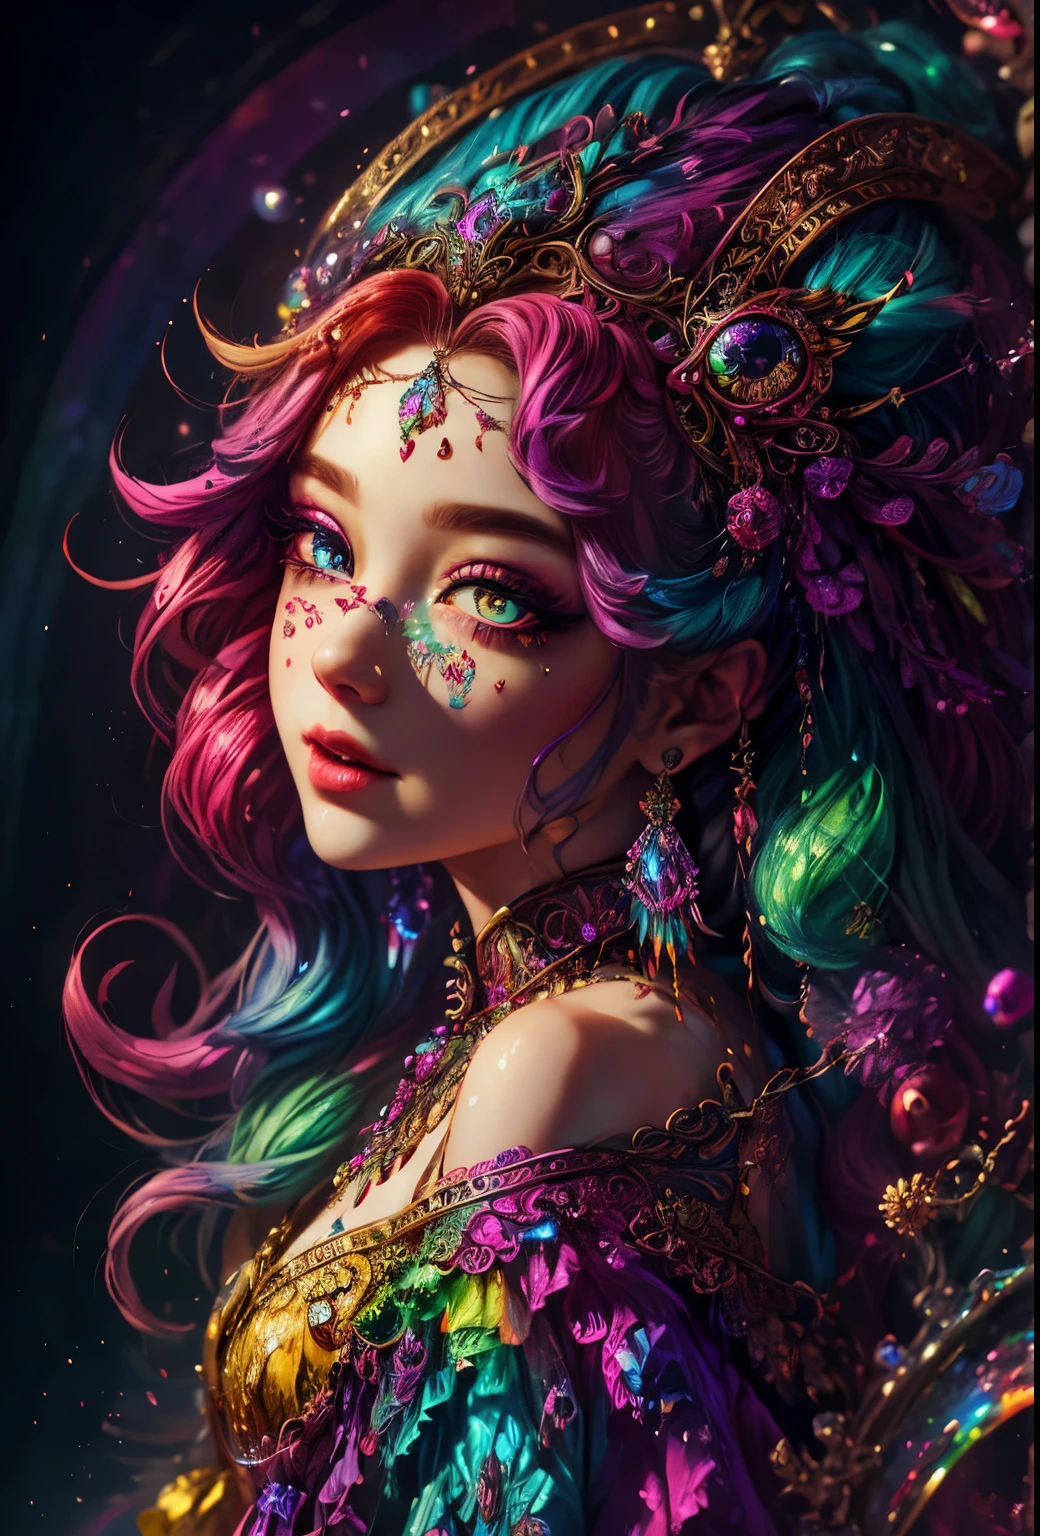 this artwork should be colorful and evoke feelings of euphoria and ecstasy. generate a beautiful fantasy woman with an interesting and dynamic manic expression. the woman is dressed in the style of harajuku decora fashion. ((((her eyes are important and should be clear and detailed.)))) there are many intricate and highly detailed decora fashion accents. clothing is ornate and extravagant with contrasting colors, textures, and patterns. include strong influences from lisa frank. include many awe-inspiring fantasy elements. ((include phantasmal iridescence, crystals, bumps, and rainbow colors that drip like paint through the artwork.)) rainbow paint should drip through hair and onto face and body. pay particular attention to a beautifully detailed face with realistic shading. include 8k eyes, highly detailed eyes, realistically detailed eyes, macro eyes, bright eyes. the overall feeling of this artwork should be happiness and excitement. the artwork should be highly ornate. impress me. the artwork should be highly creative and ultra ornate. include many decora decorations and accessories. (fantasy00d), high quality, highres, detail enhancement